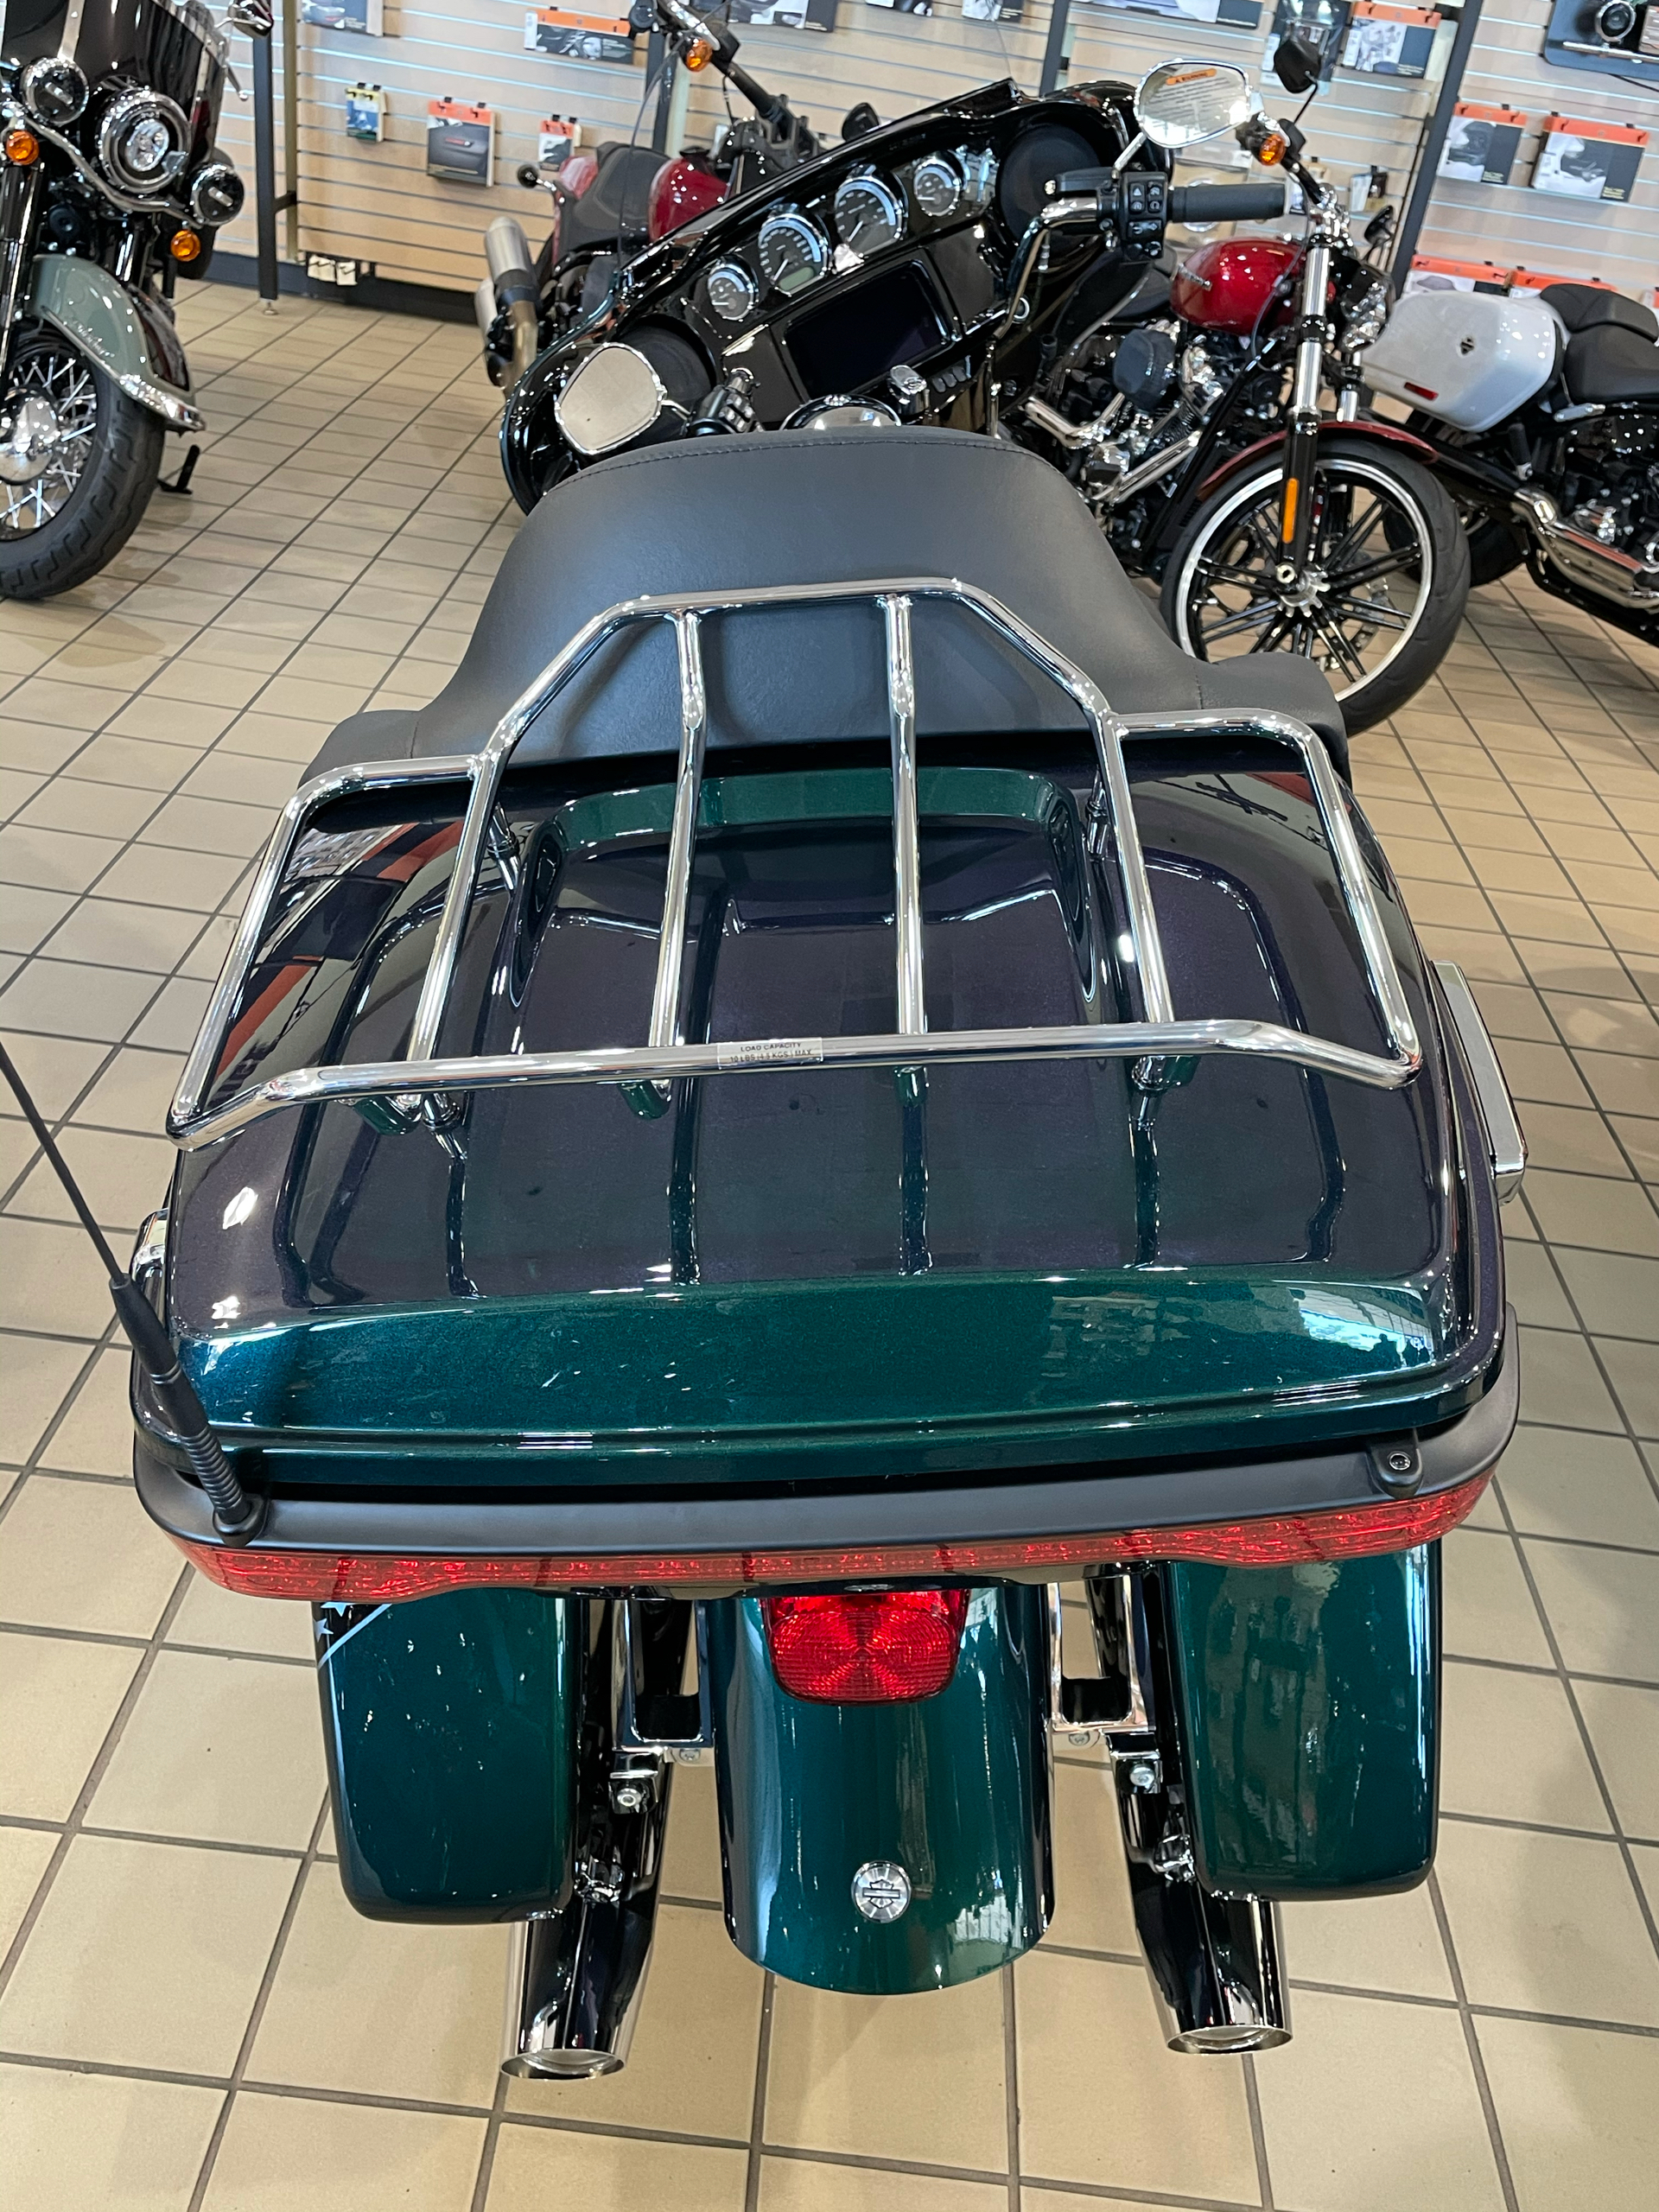 2021 Harley-Davidson Ultra Limited in Dumfries, Virginia - Photo 3